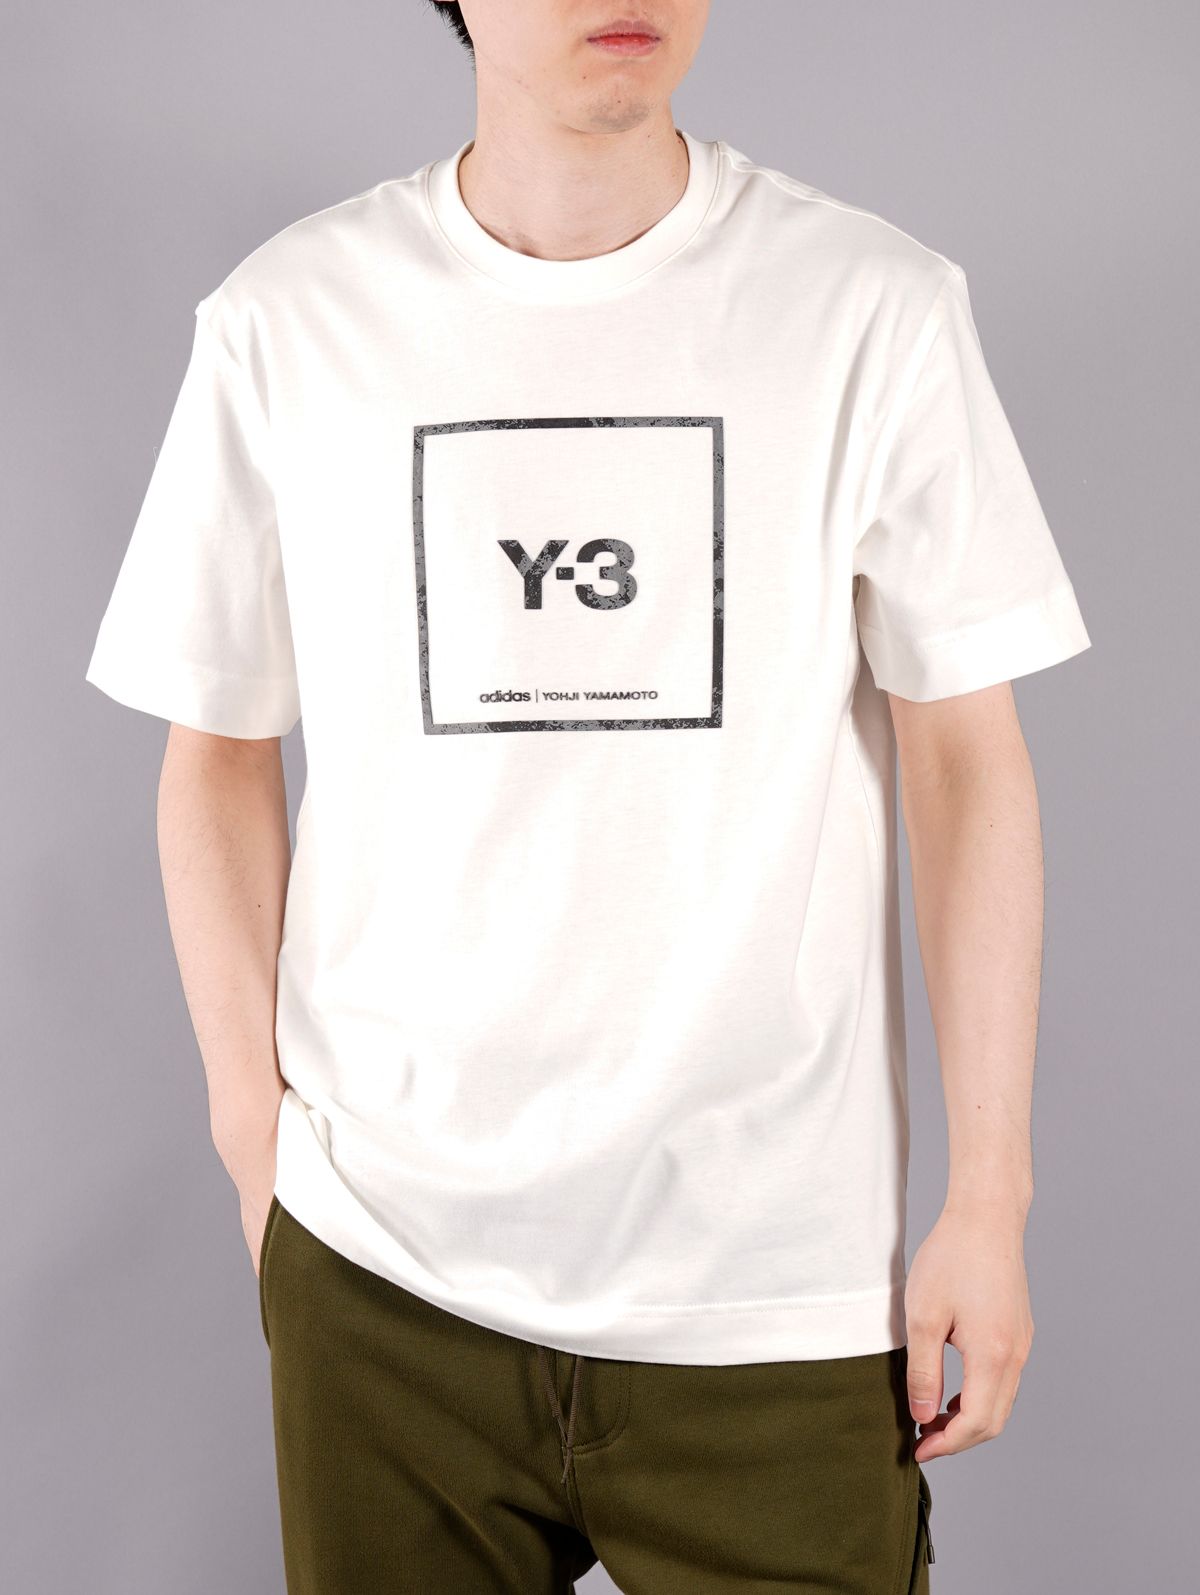 XL 新品 21SS Y-3 スクエア ラベル グラフィック SS Tシャツ 白cypherY3